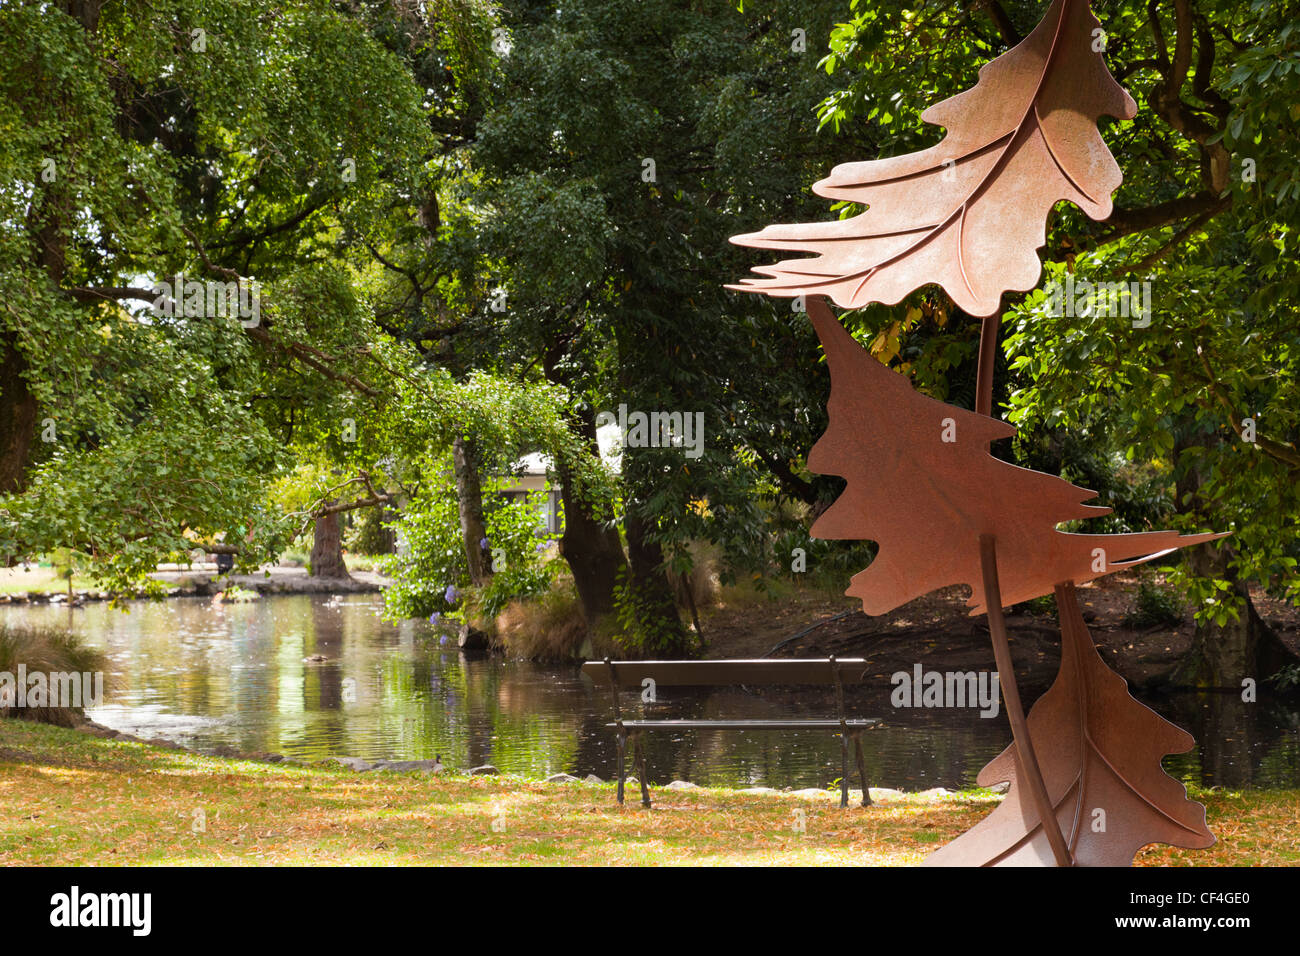 Leaf sculpture in Hagley Park, Christchurch, New Zealand, by Raymond Herber 2006. Stock Photo